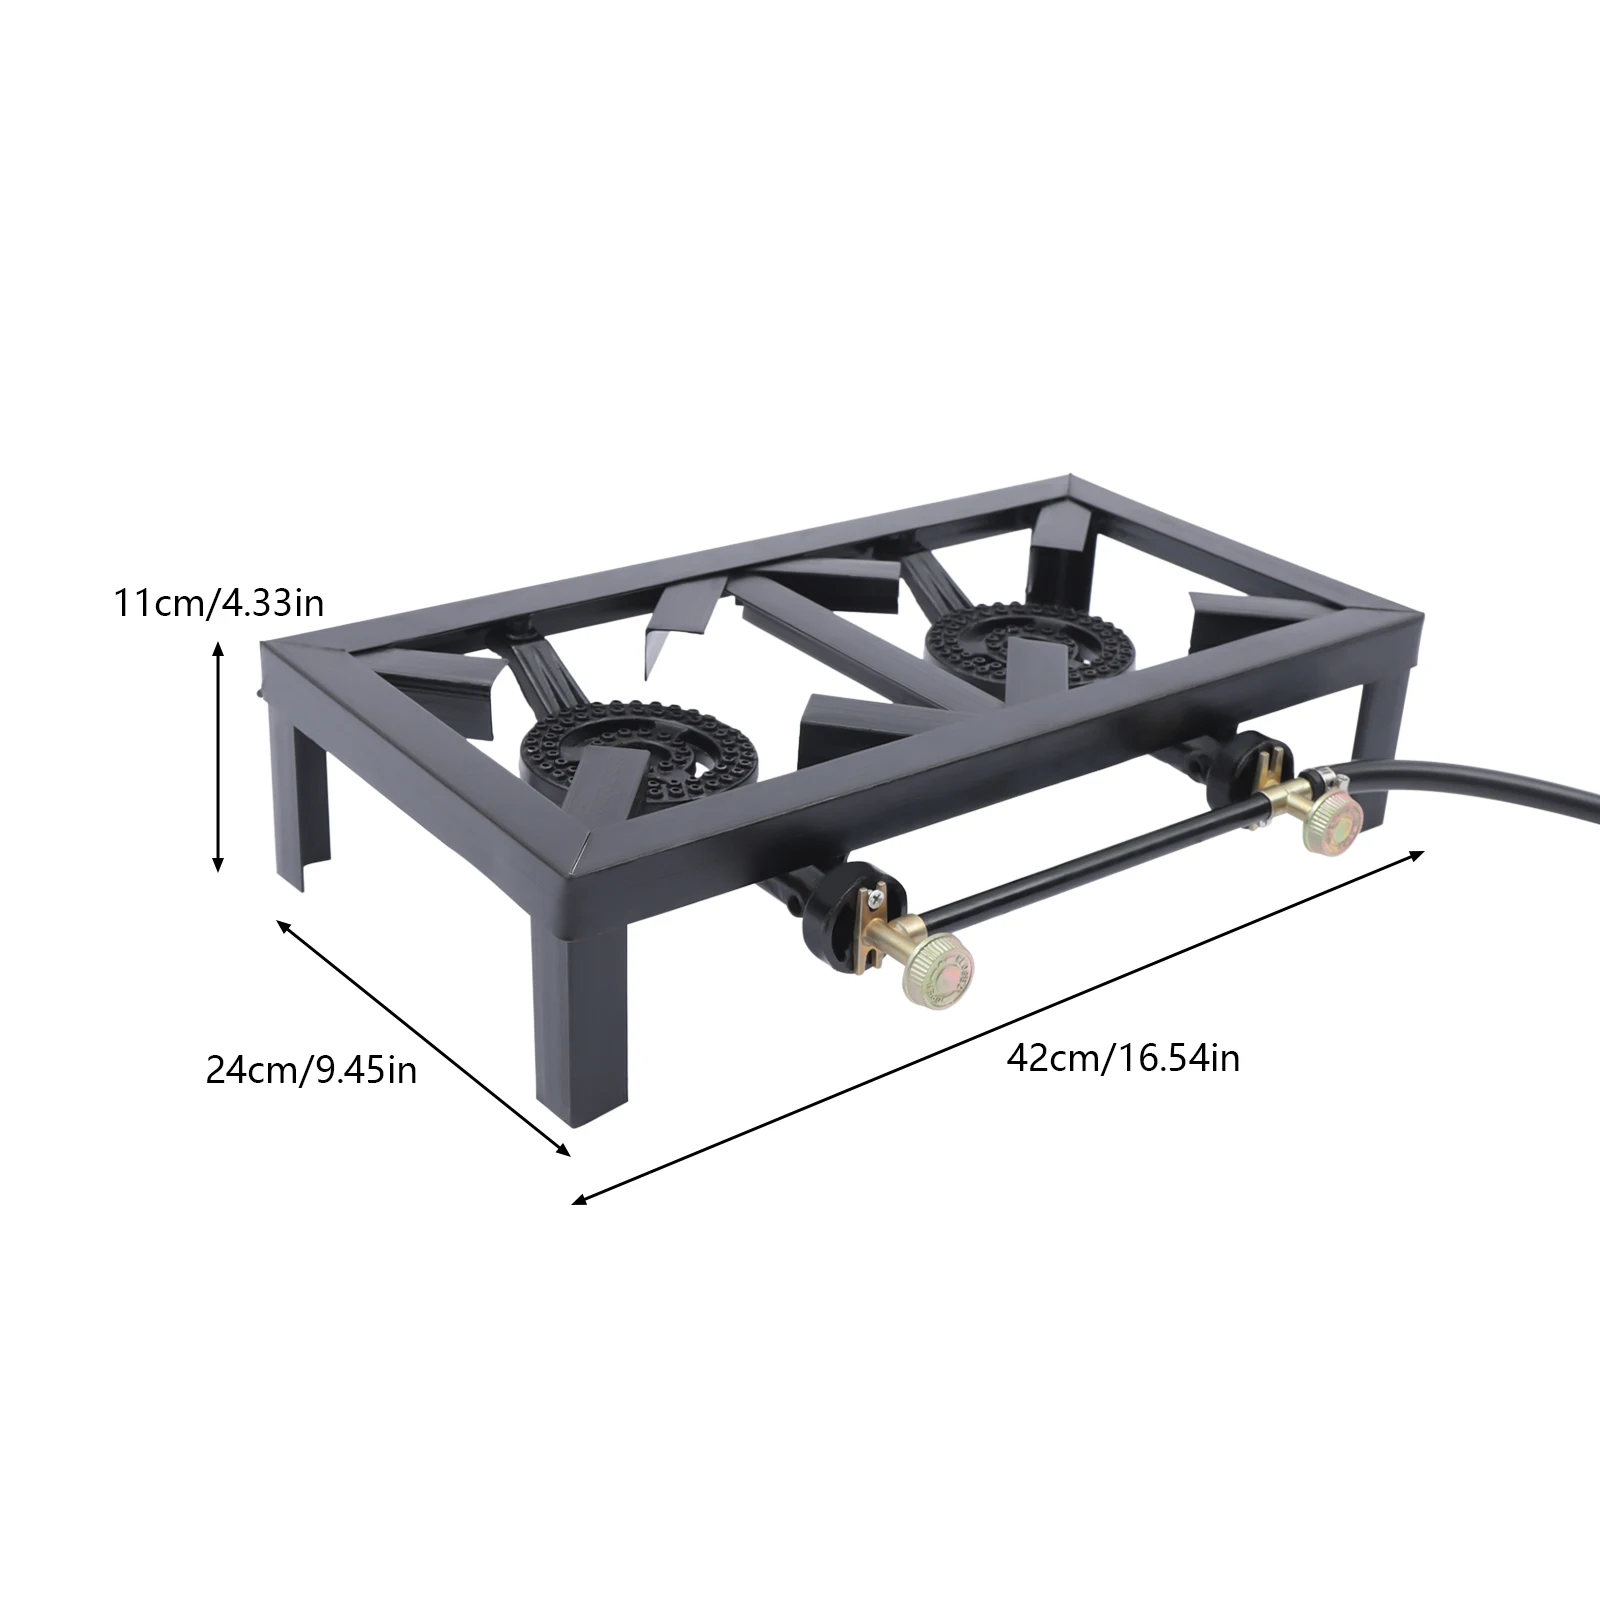 Outdoor Propane Stove Portable 4 Burner Camping Cooking Stove